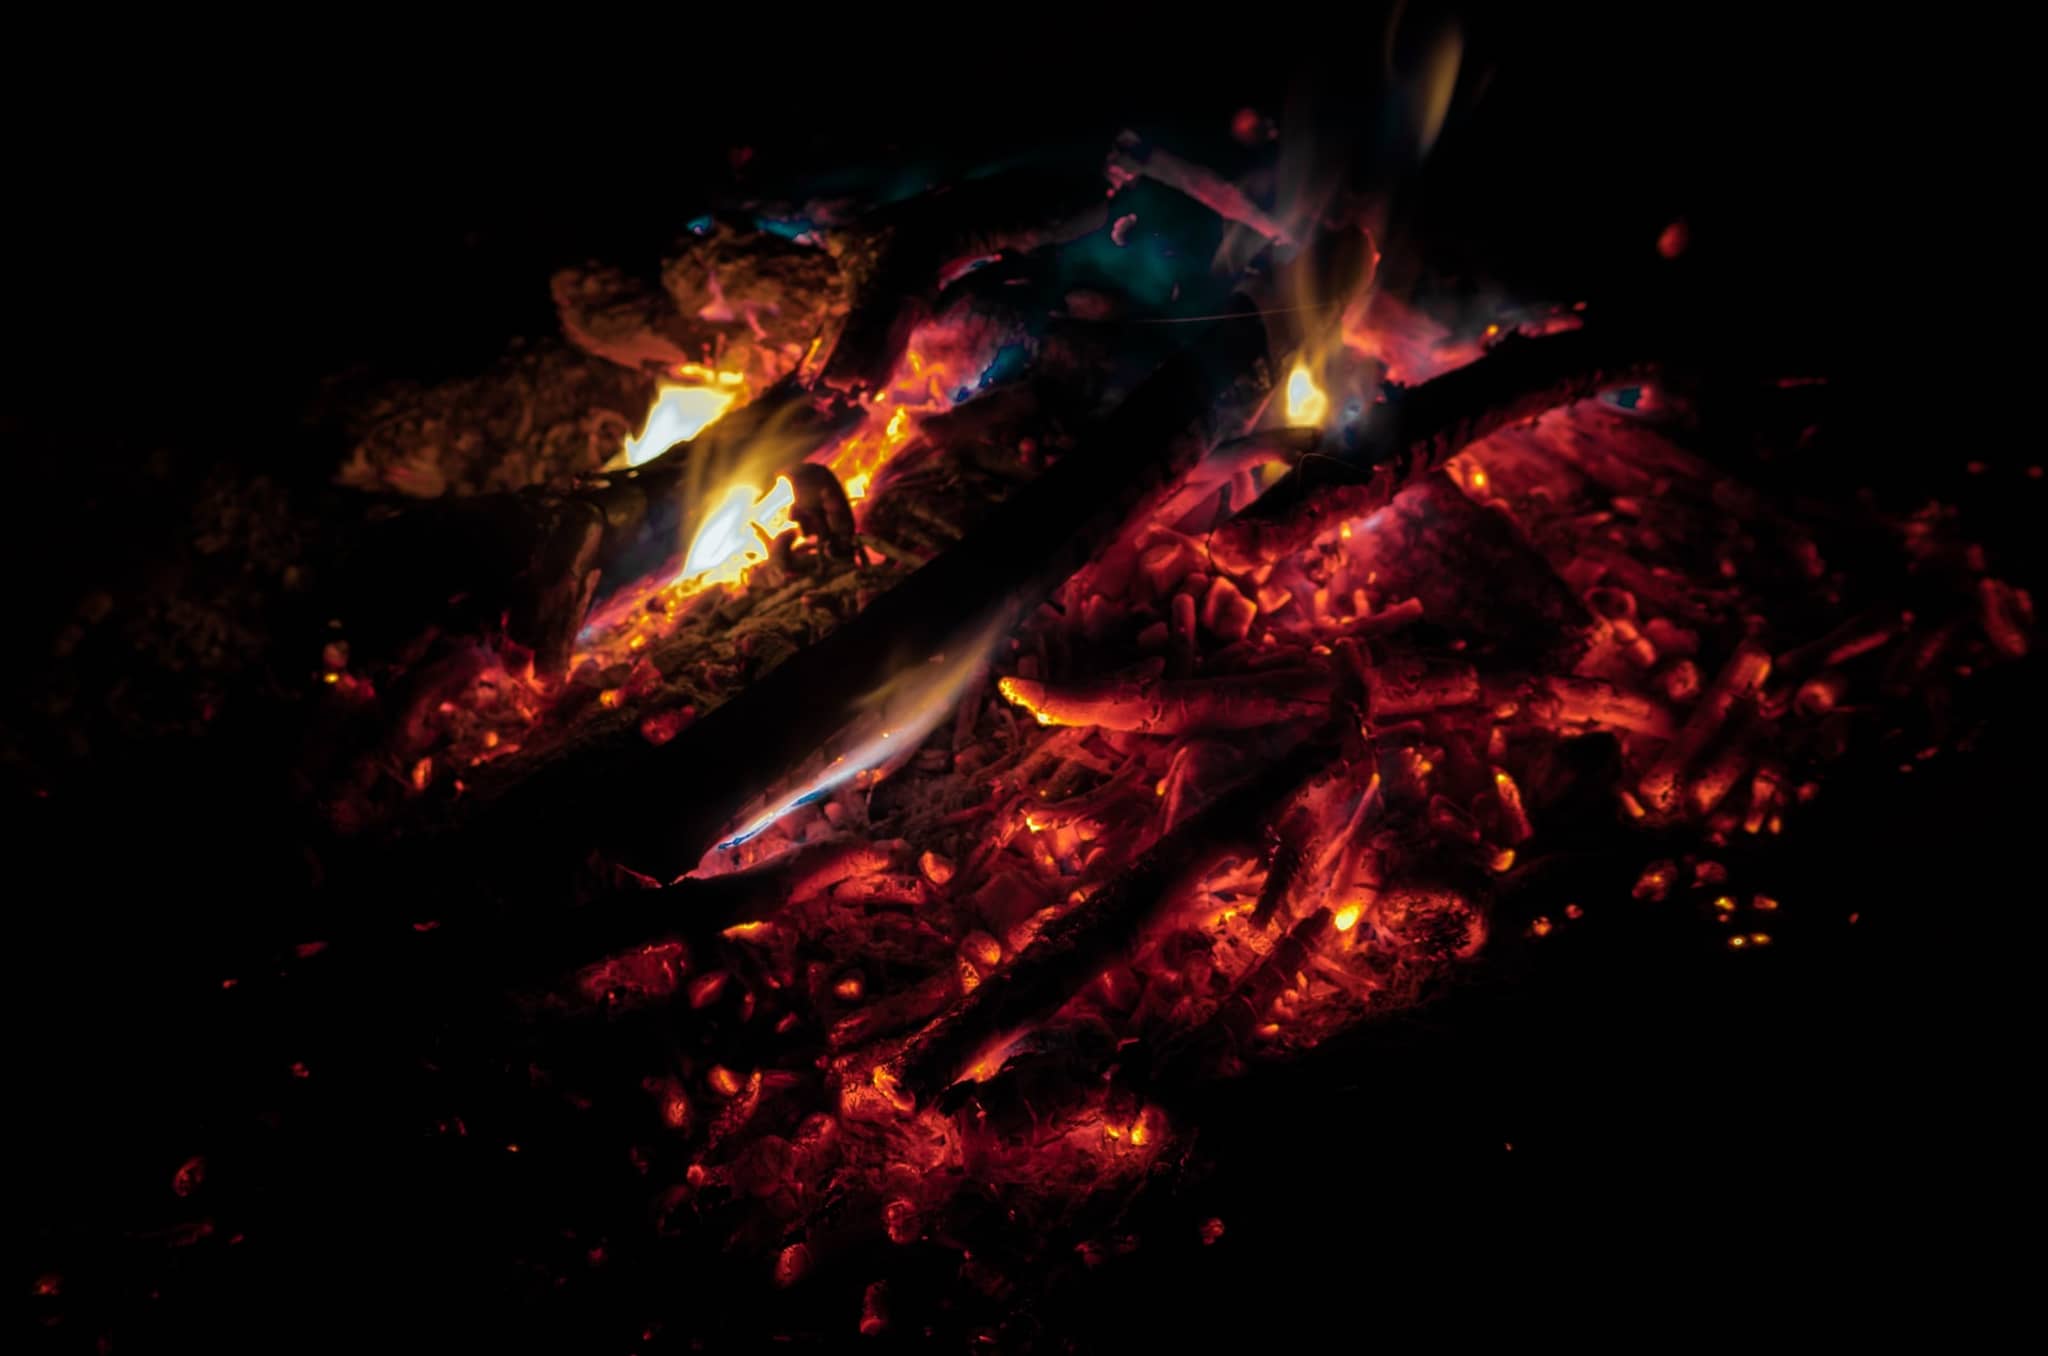 A campfire, with the fire slowly becoming smaller which eventually will extinguish. Photo by Justin Chavanelle on Unsplash.